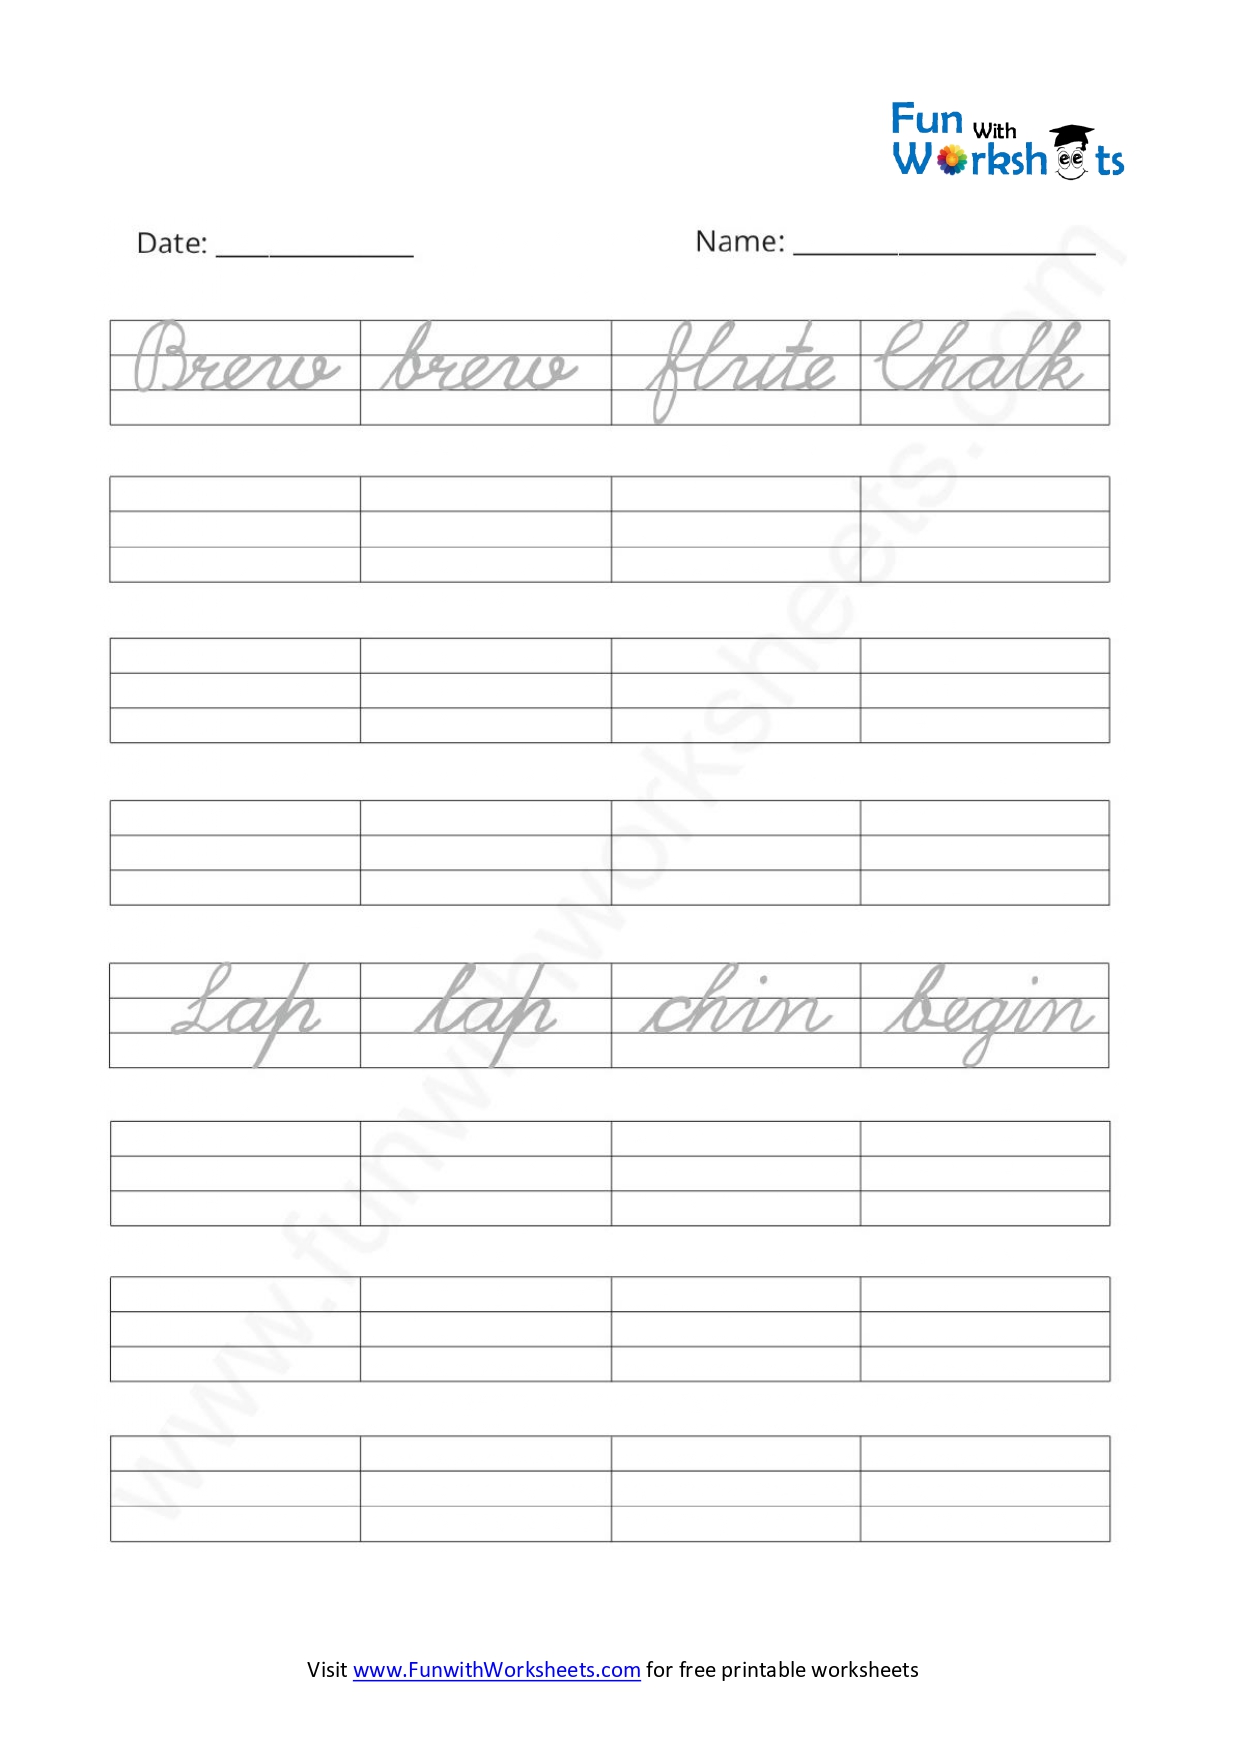 Free Printable Worksheets -Cursive words practice Archives - FUN with ...